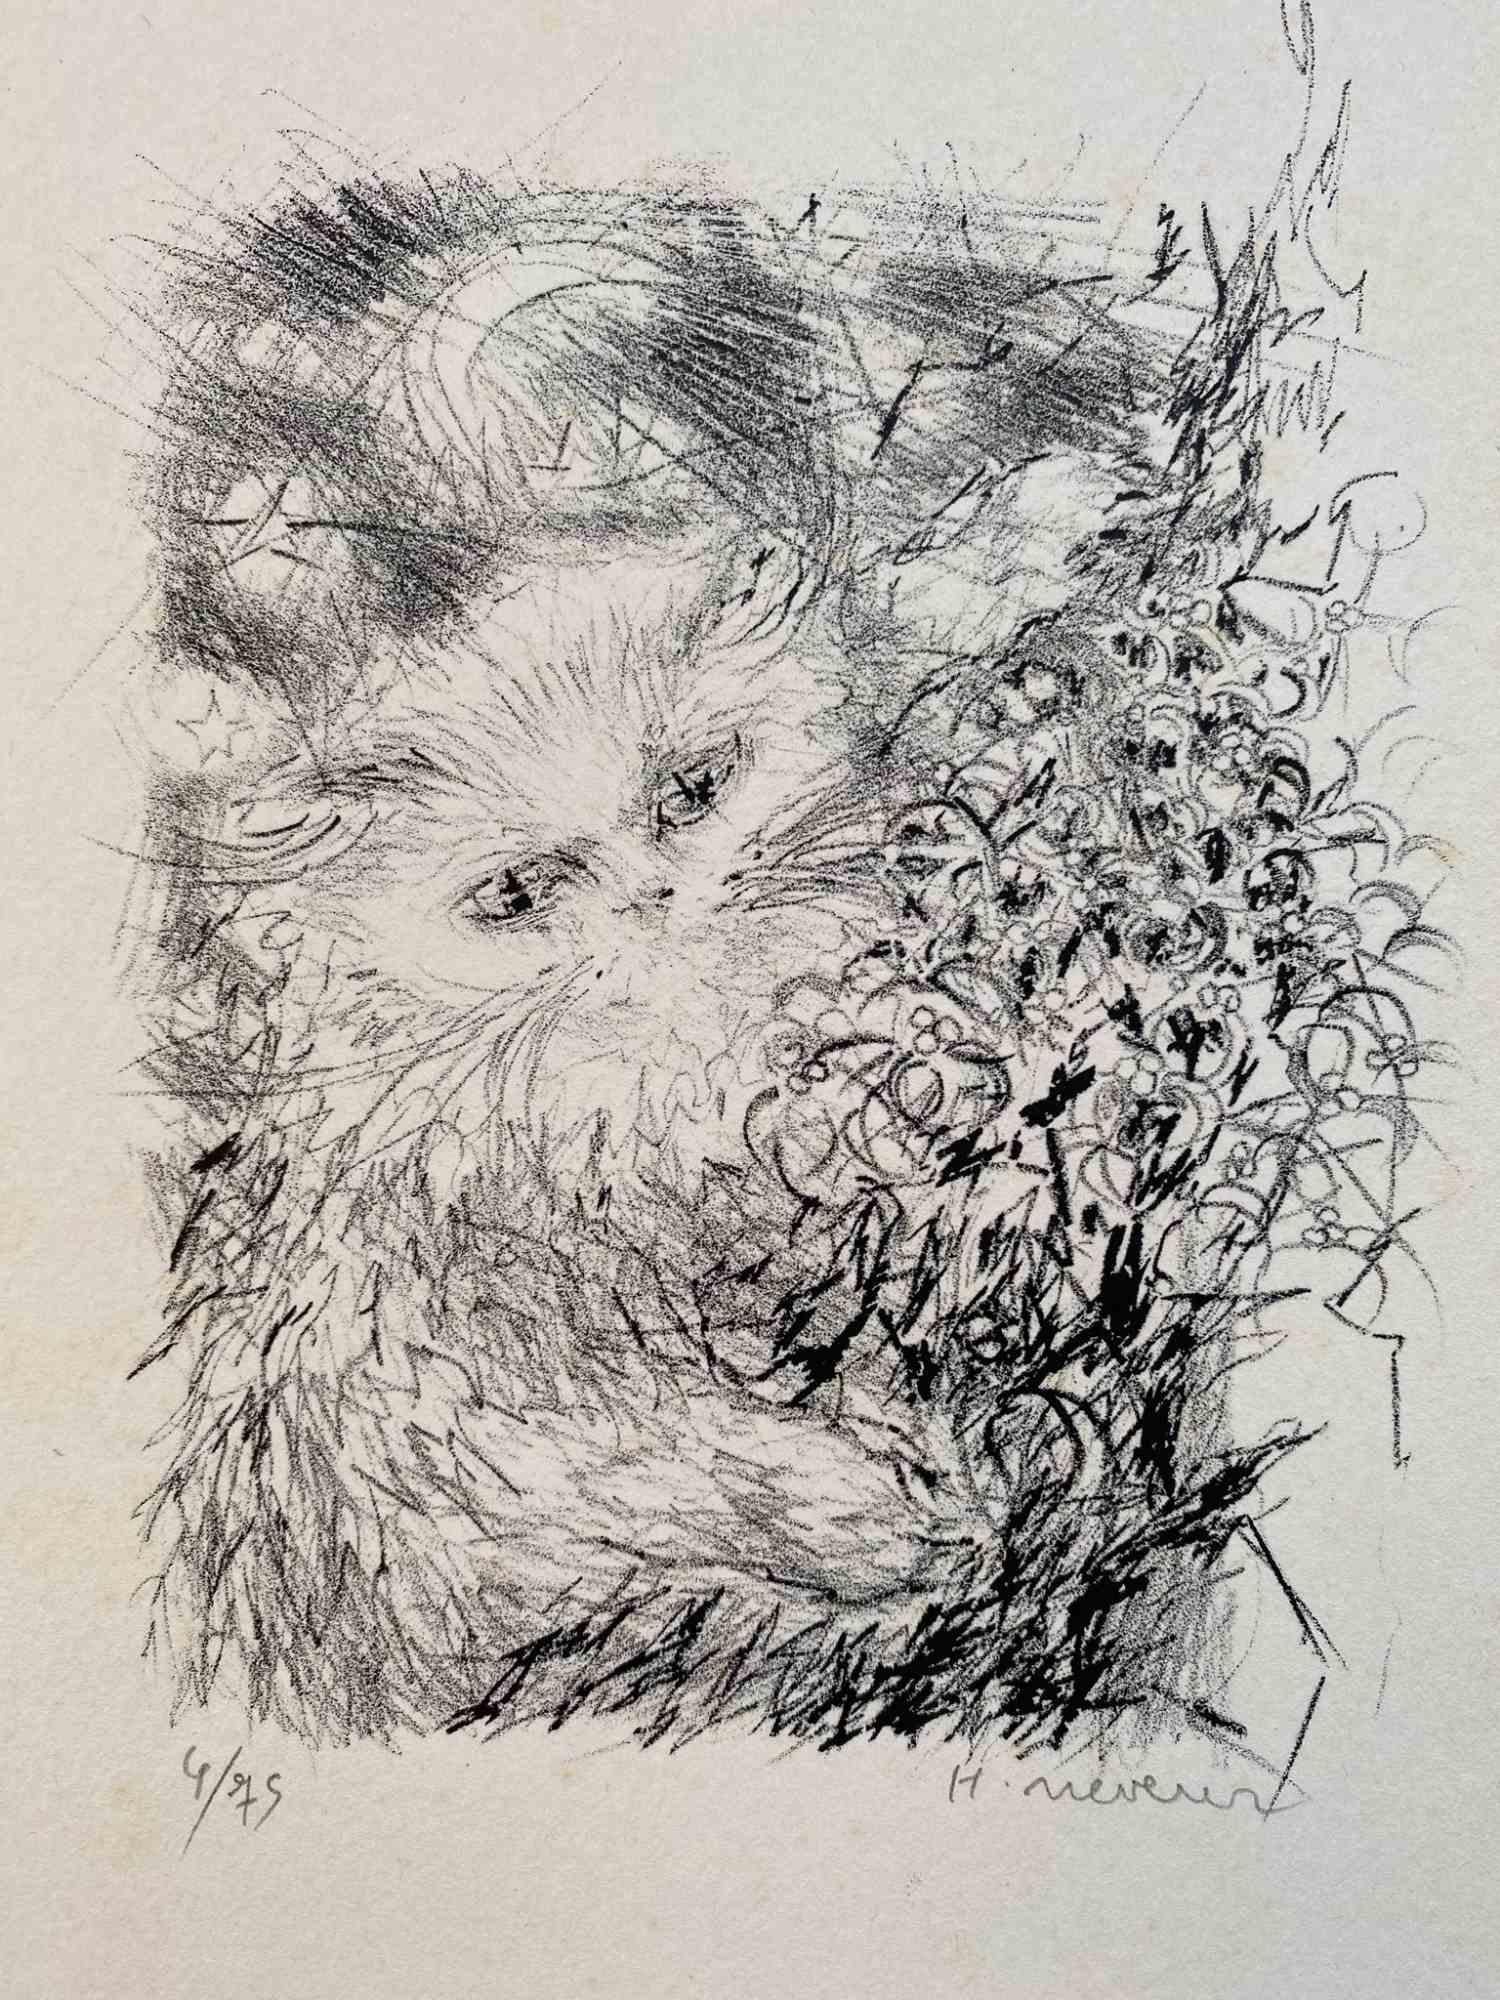 Sketchof Cat View is an original lithographia realized by Helène Neveur in 19870s.

Good conditions.

Numbered. Edition, 4/75.

The artwork is depicted through confident strokes in a well-balanced composition.